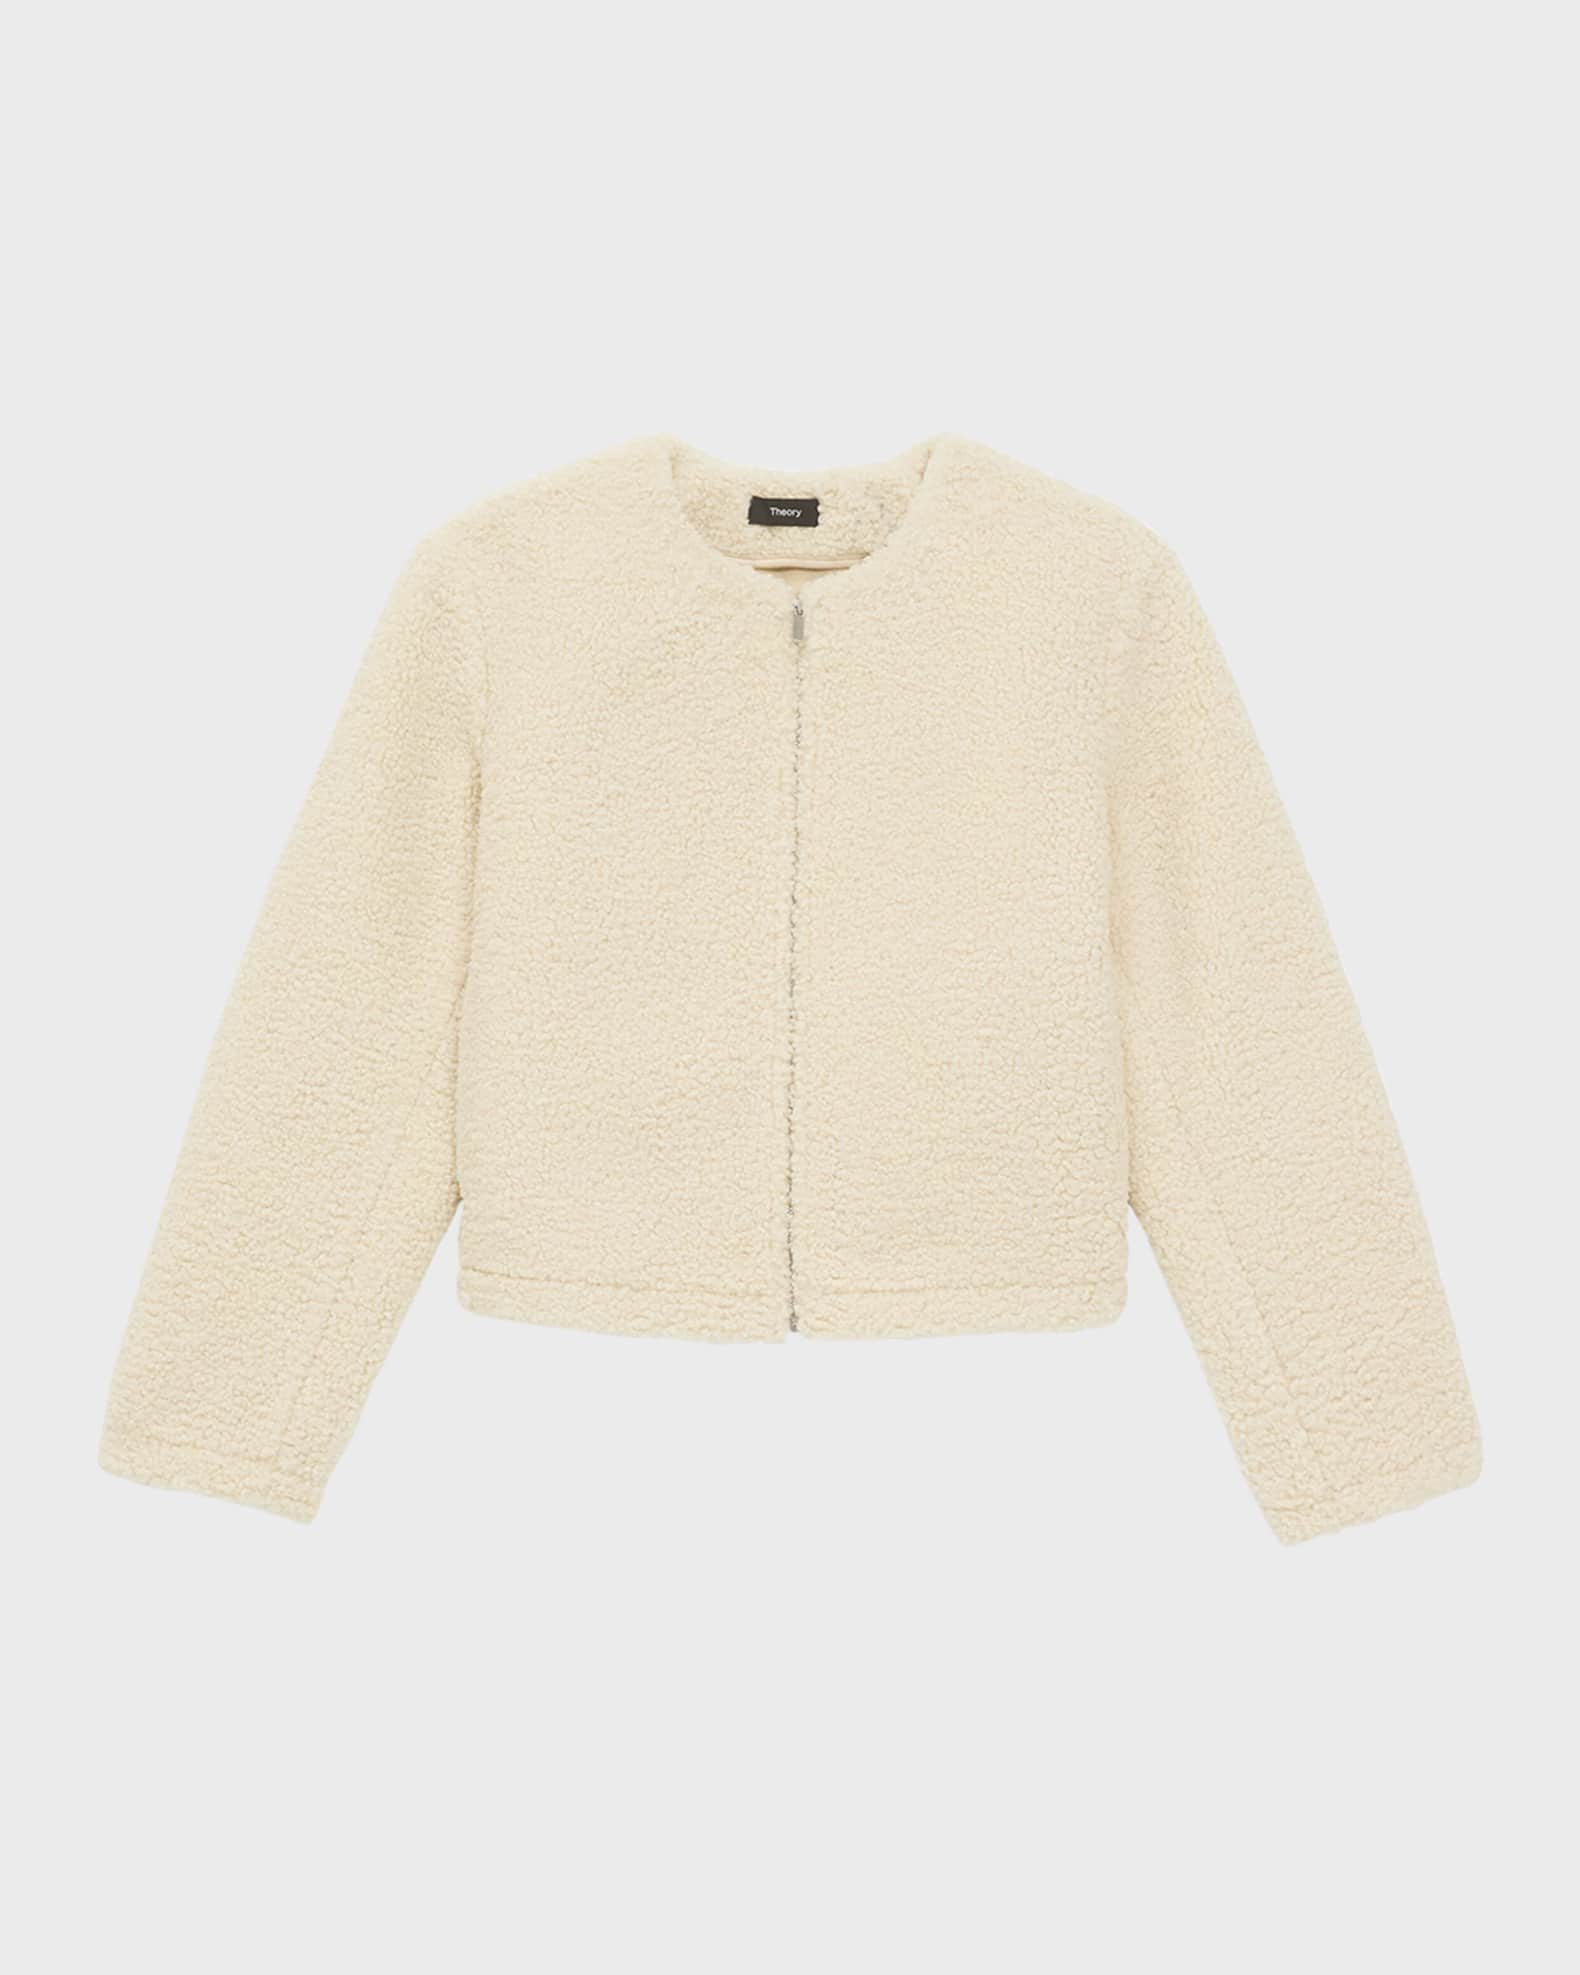 Theory Cropped Easy Sherpa Jacket | Neiman Marcus